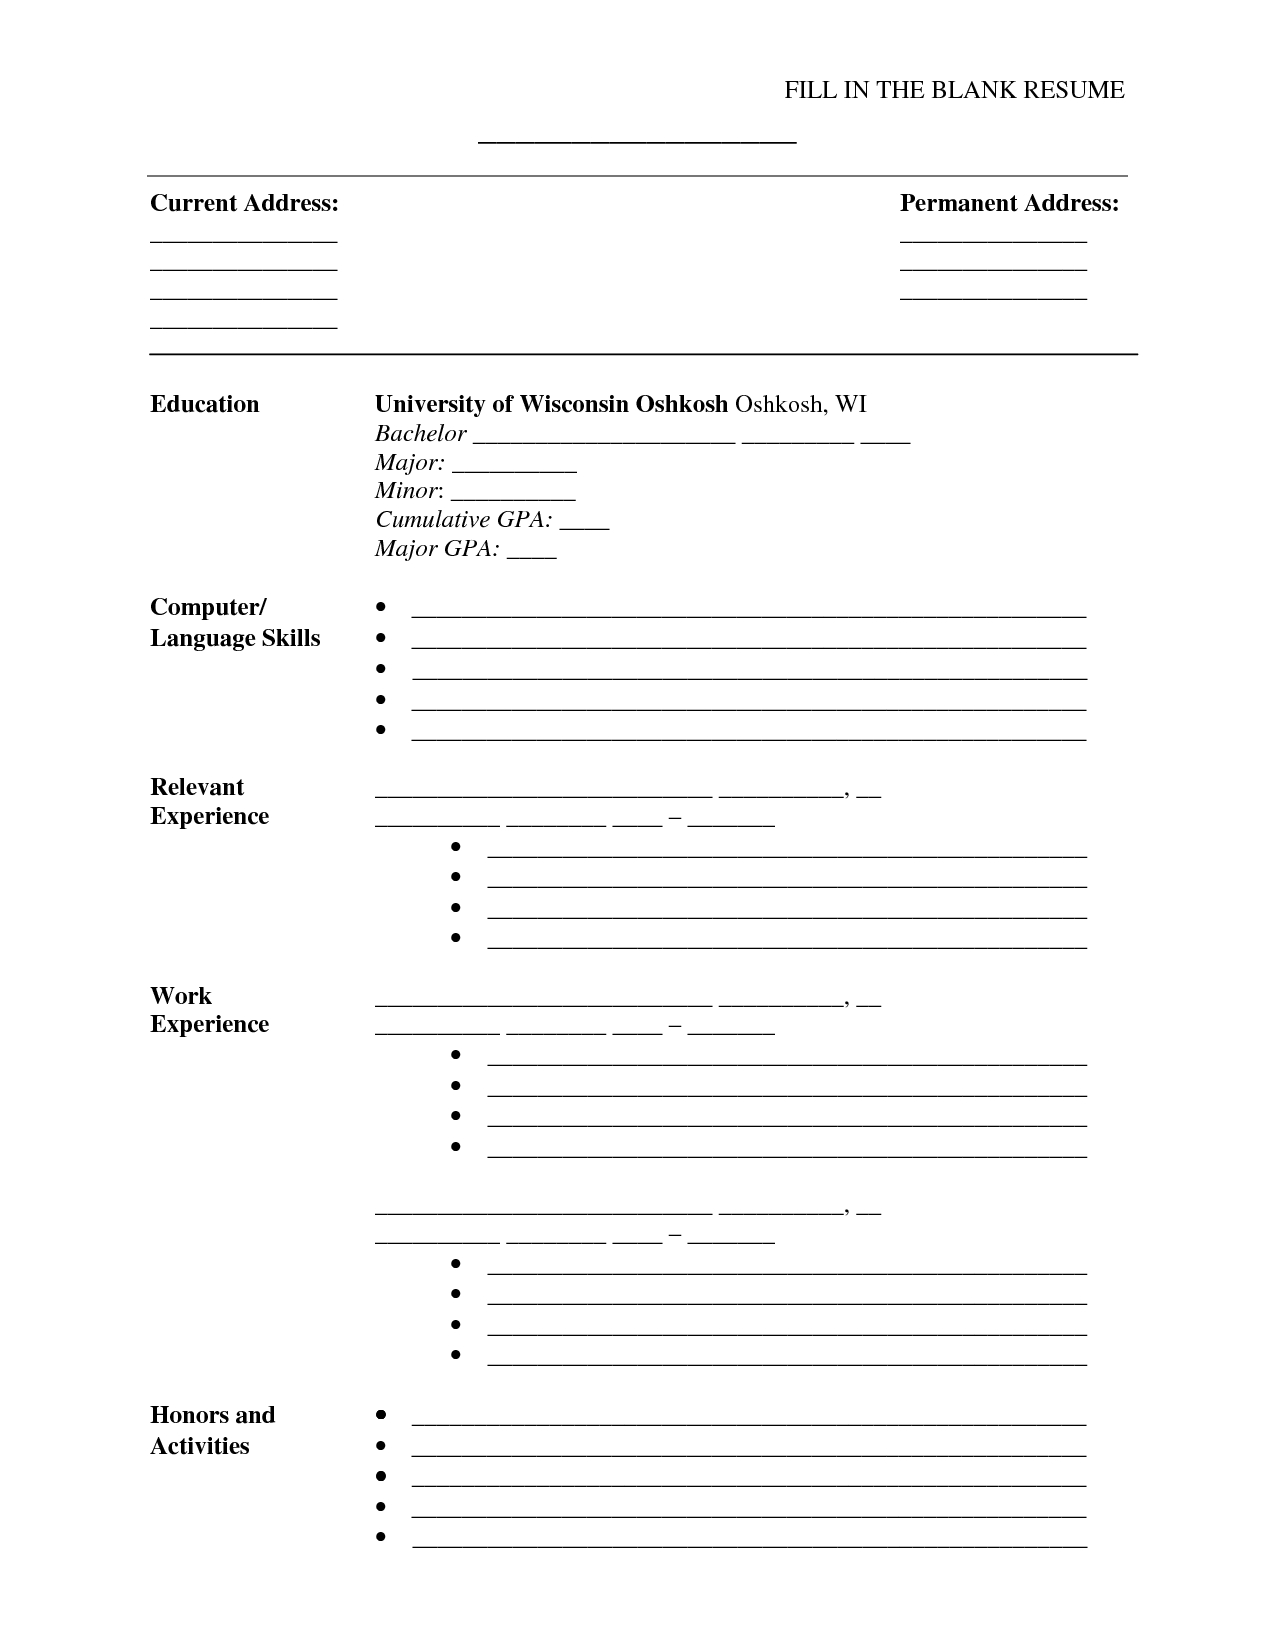 A Cv Template To Fill In | Job Hunt | Sample Resume Format With Regard To Blank Resume Templates For Microsoft Word